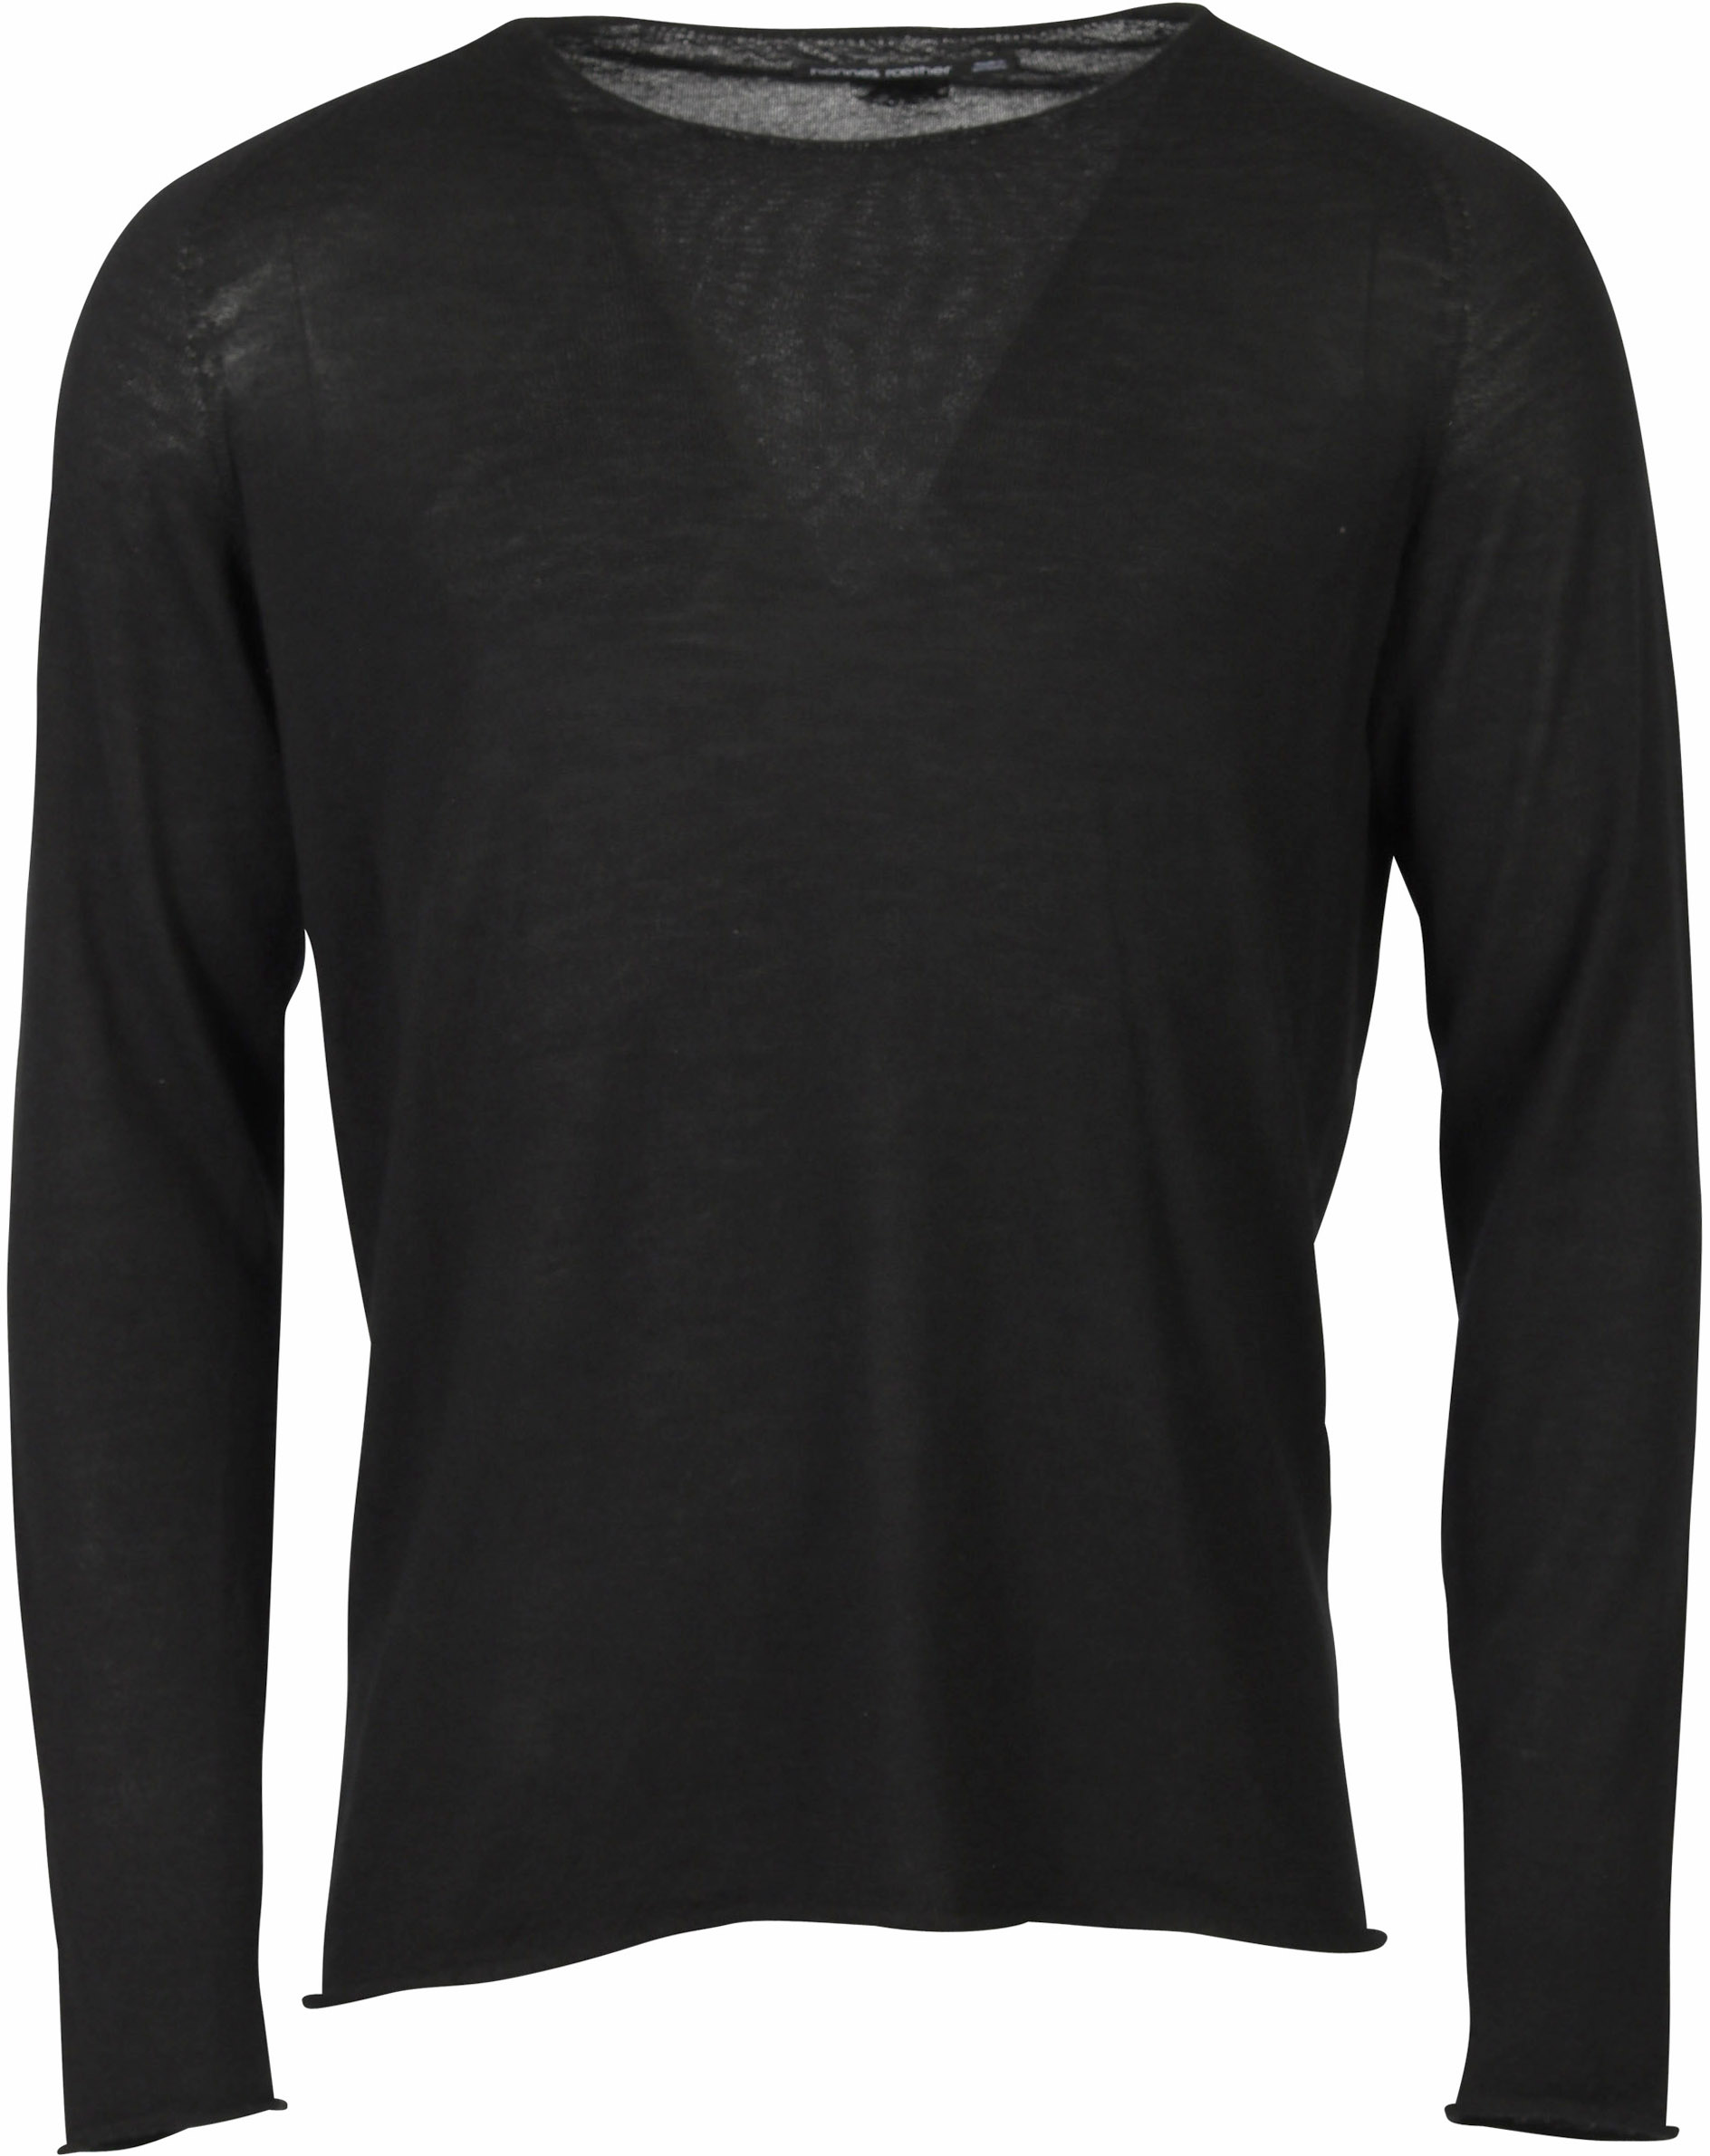 Hannes Roether Cashmere Pullover Black